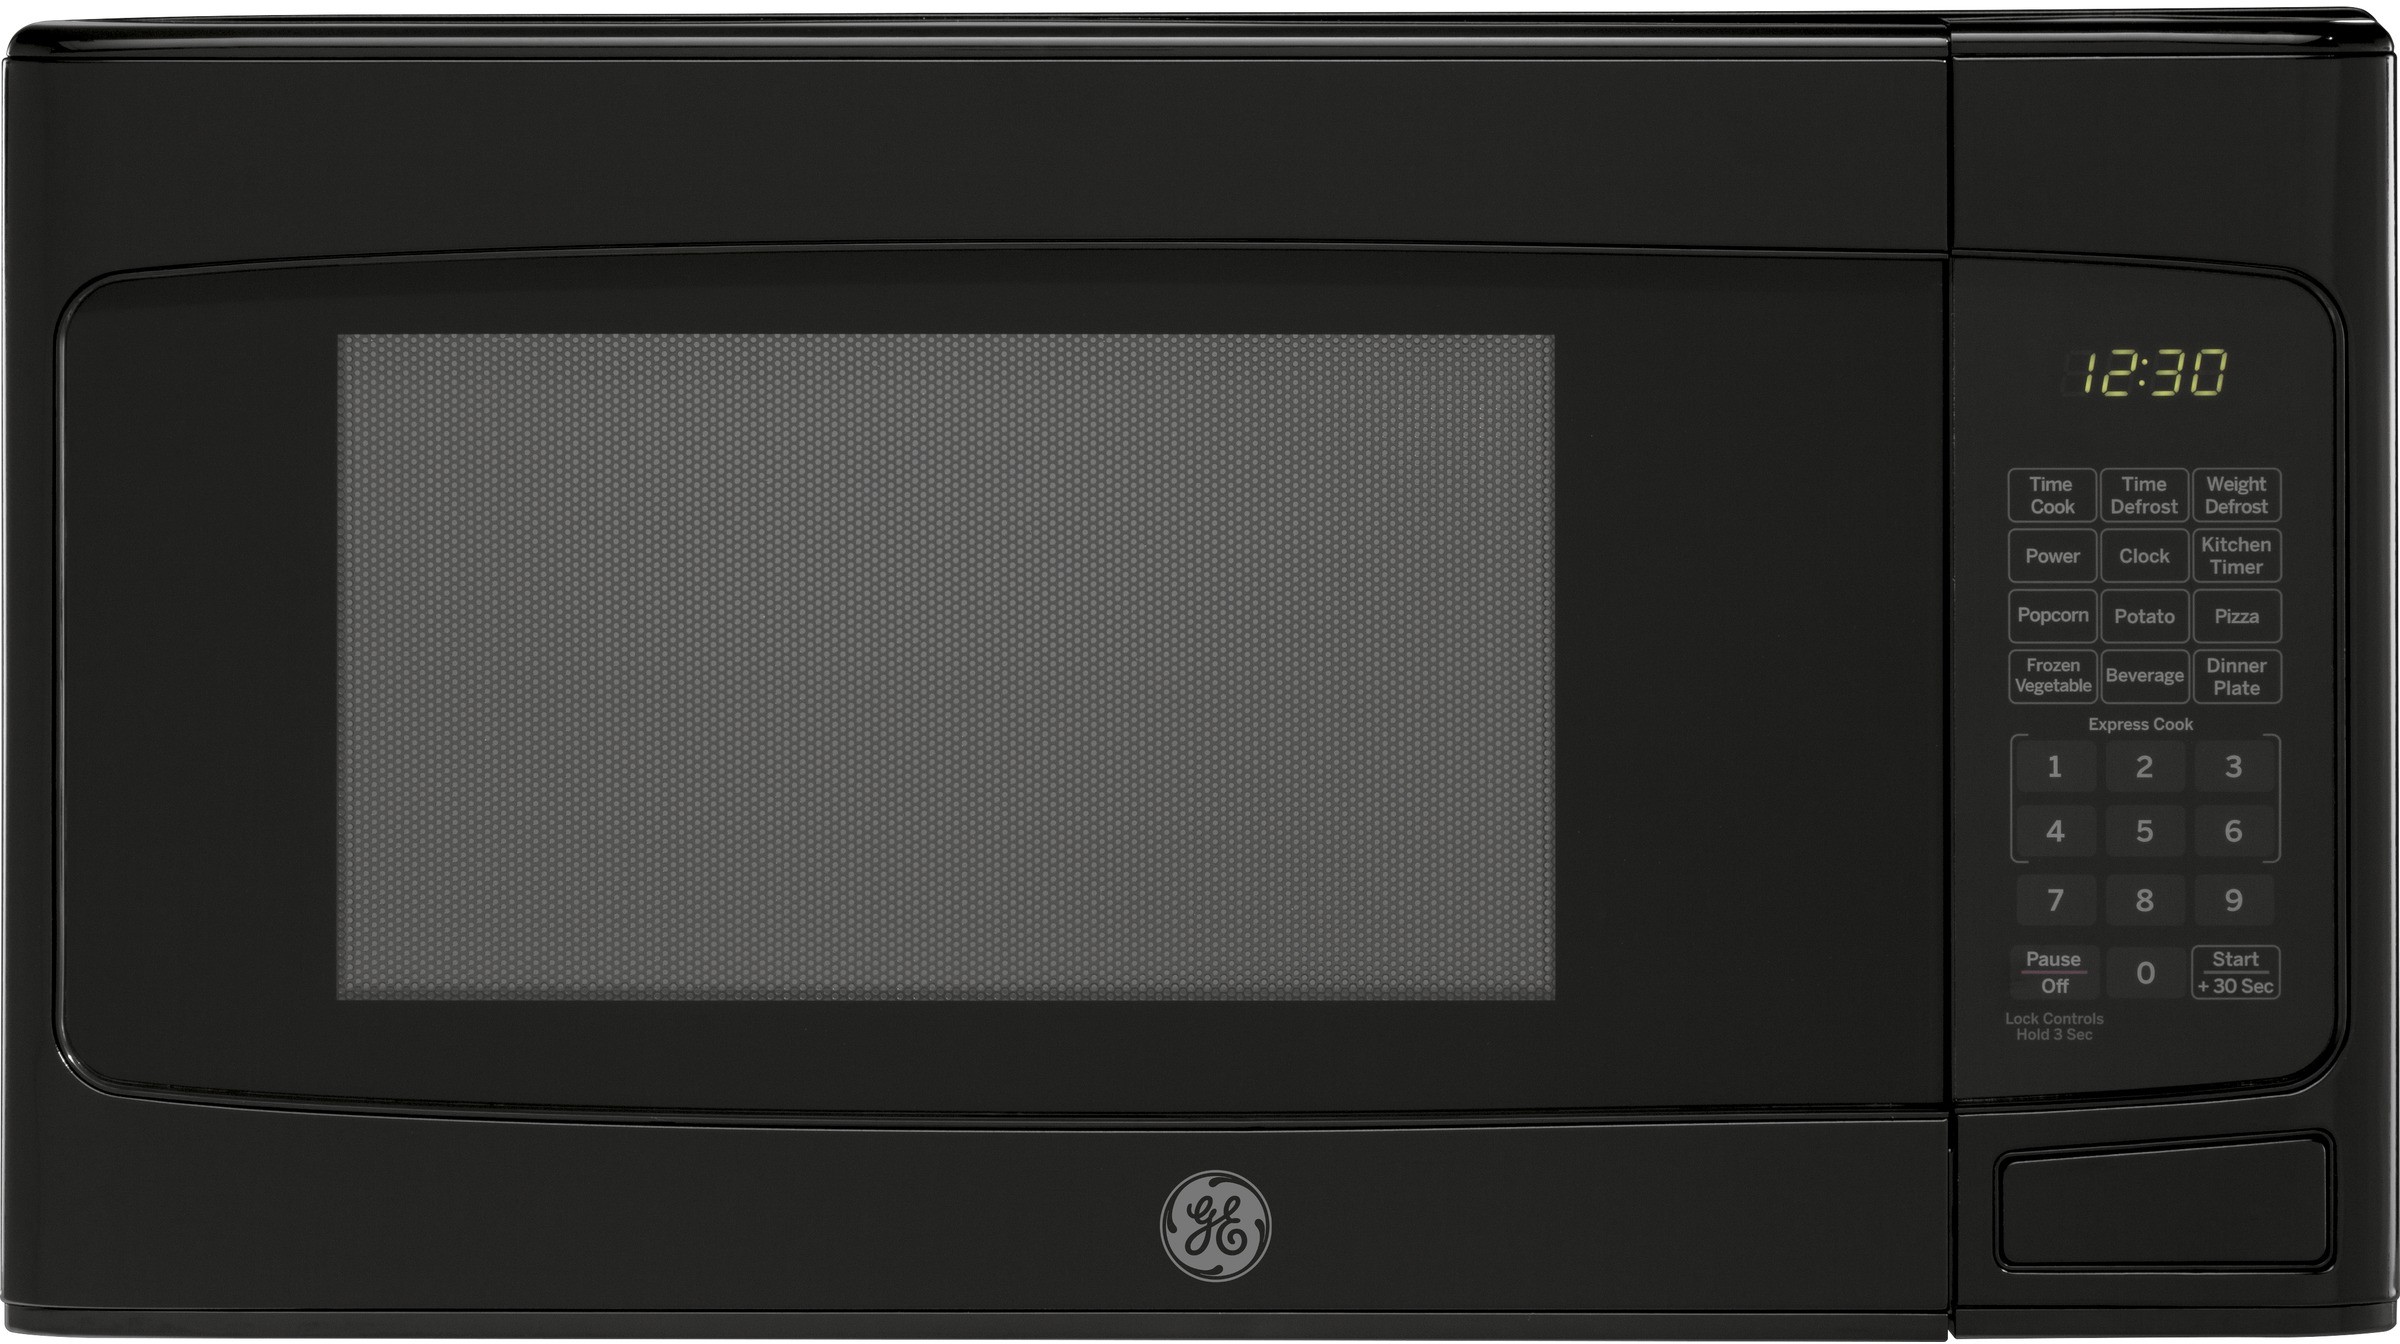 GE JES1145DMBB 20 Inch Countertop Microwave Oven with 950 Watts, Auto